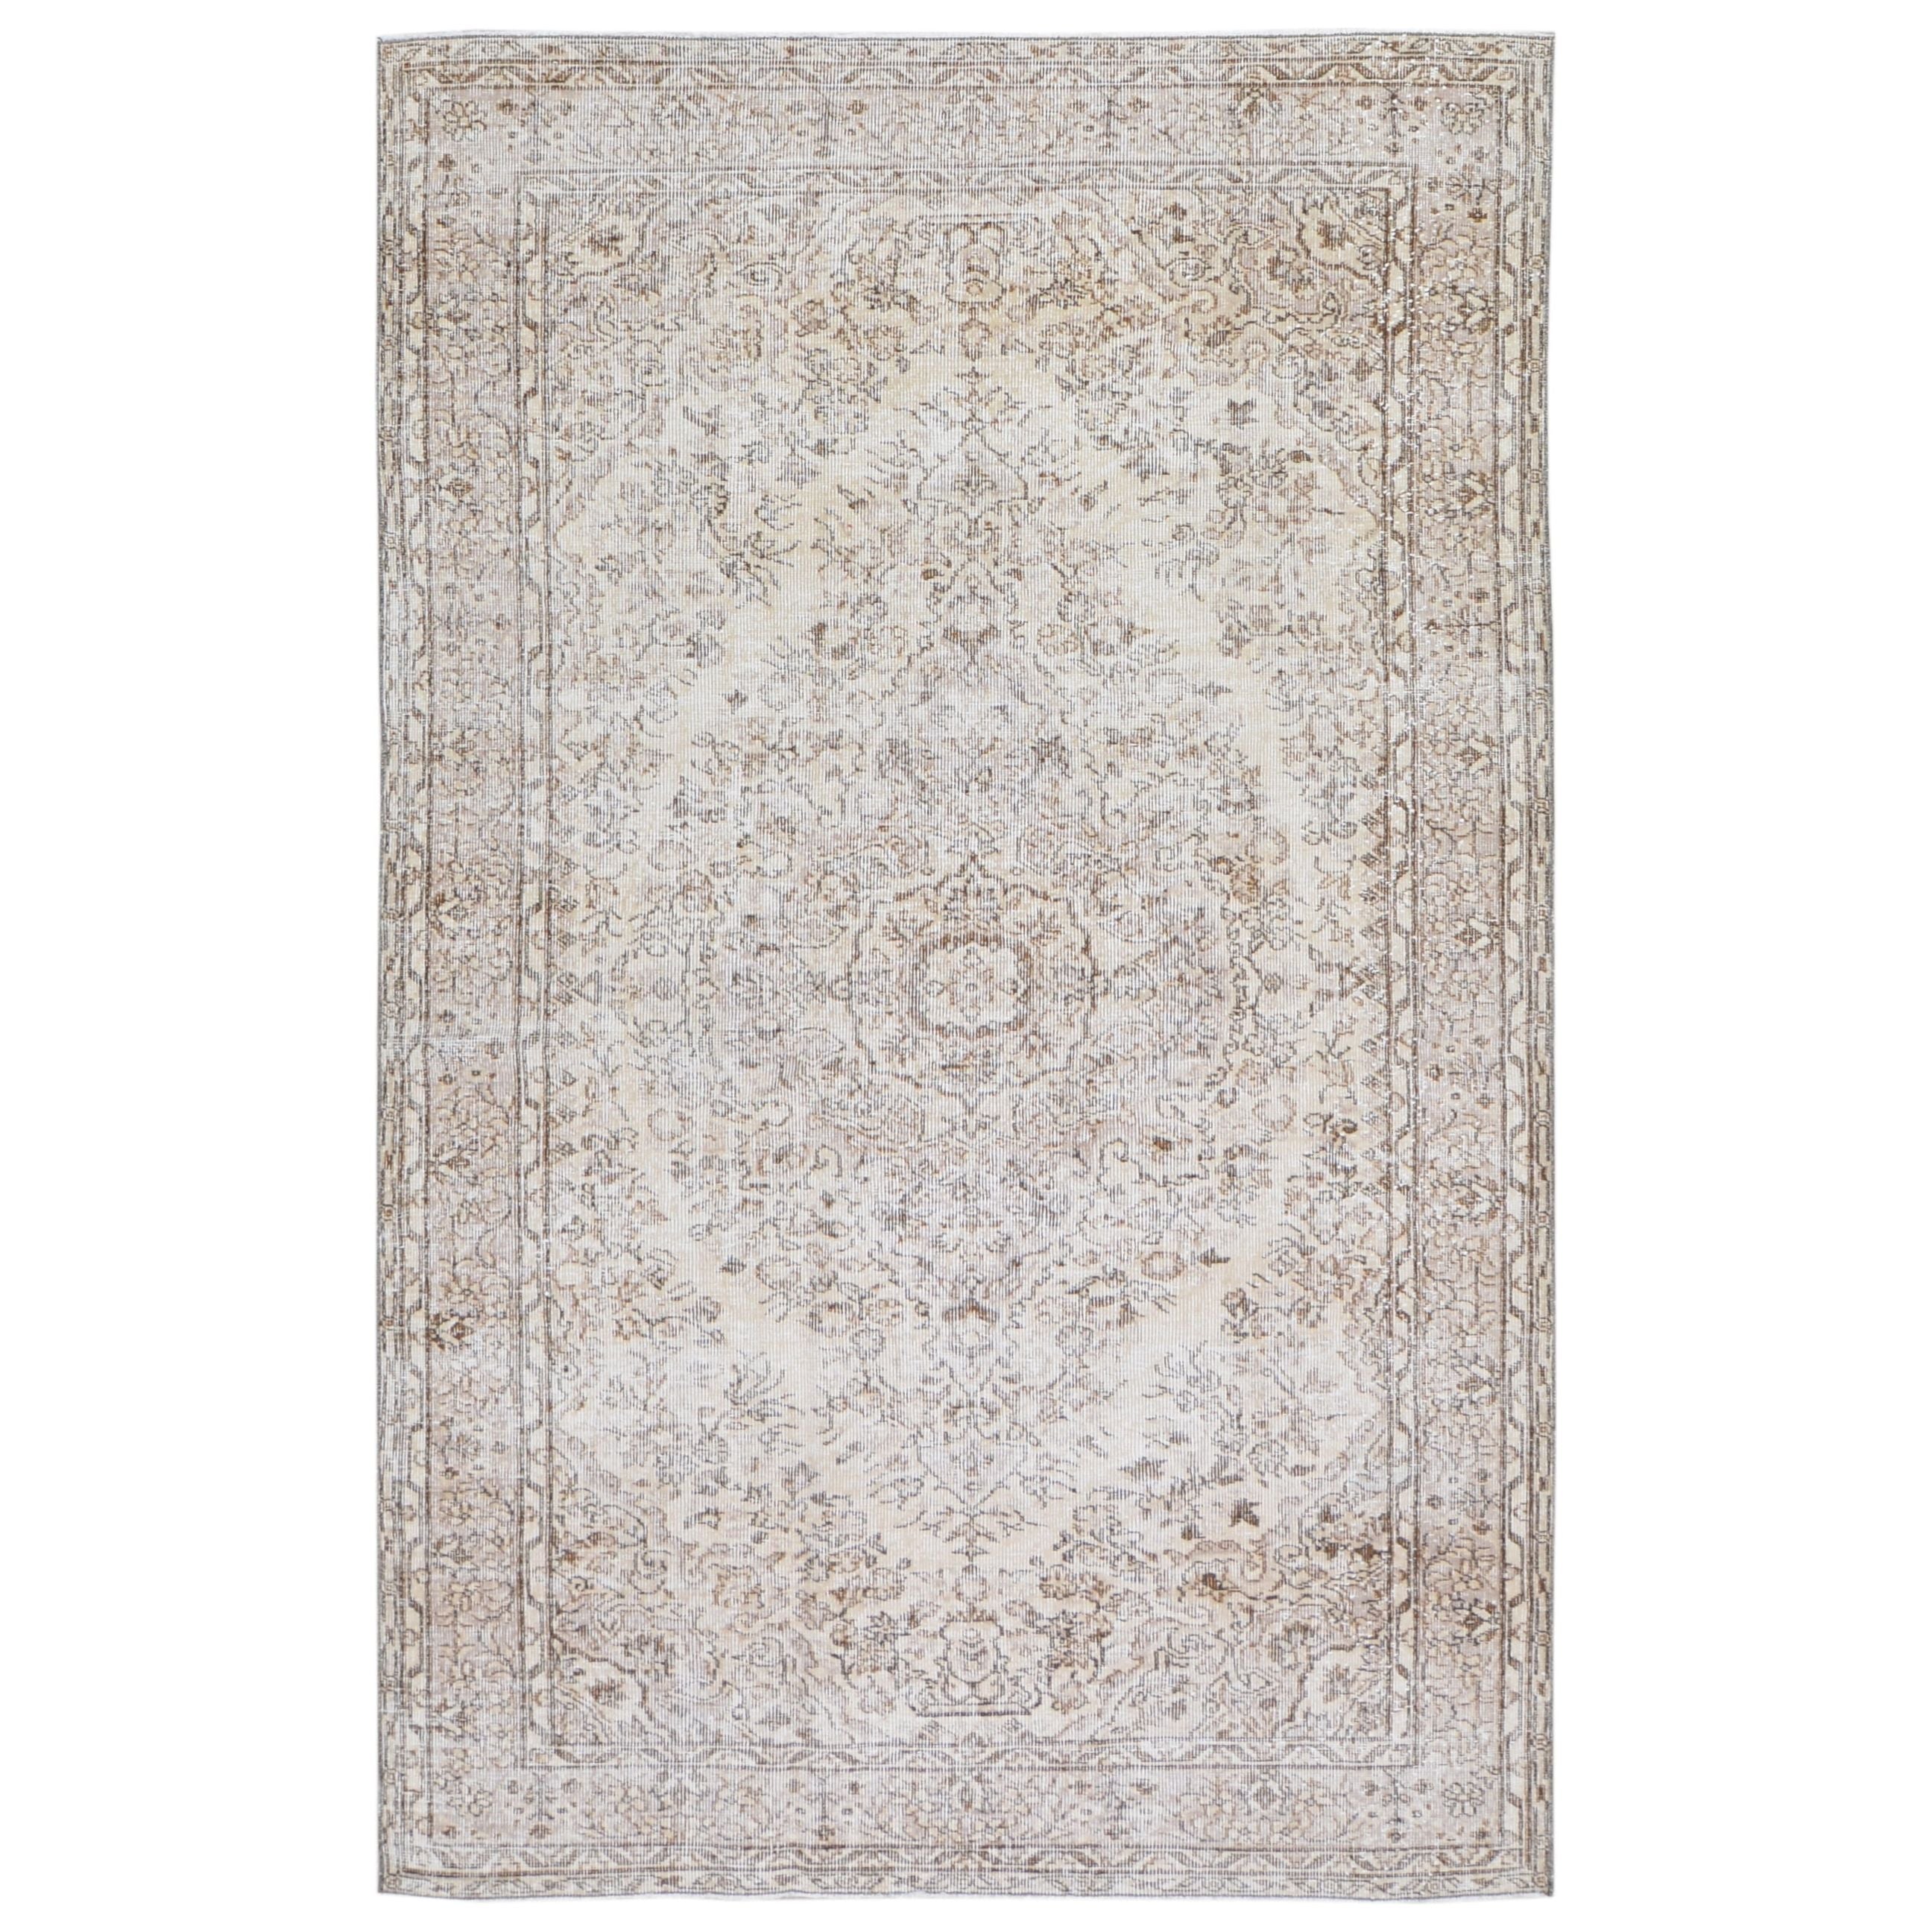 The Vintage Cheval Rug features beautiful design of the old traditional layout. This rug is easy to maintain and clean because of it’s very little shedding. A perfect rug for your entryway, living and other space. Amethyst Home provides interior design services, furniture, rugs, and lighting in the Kansas City metro area.